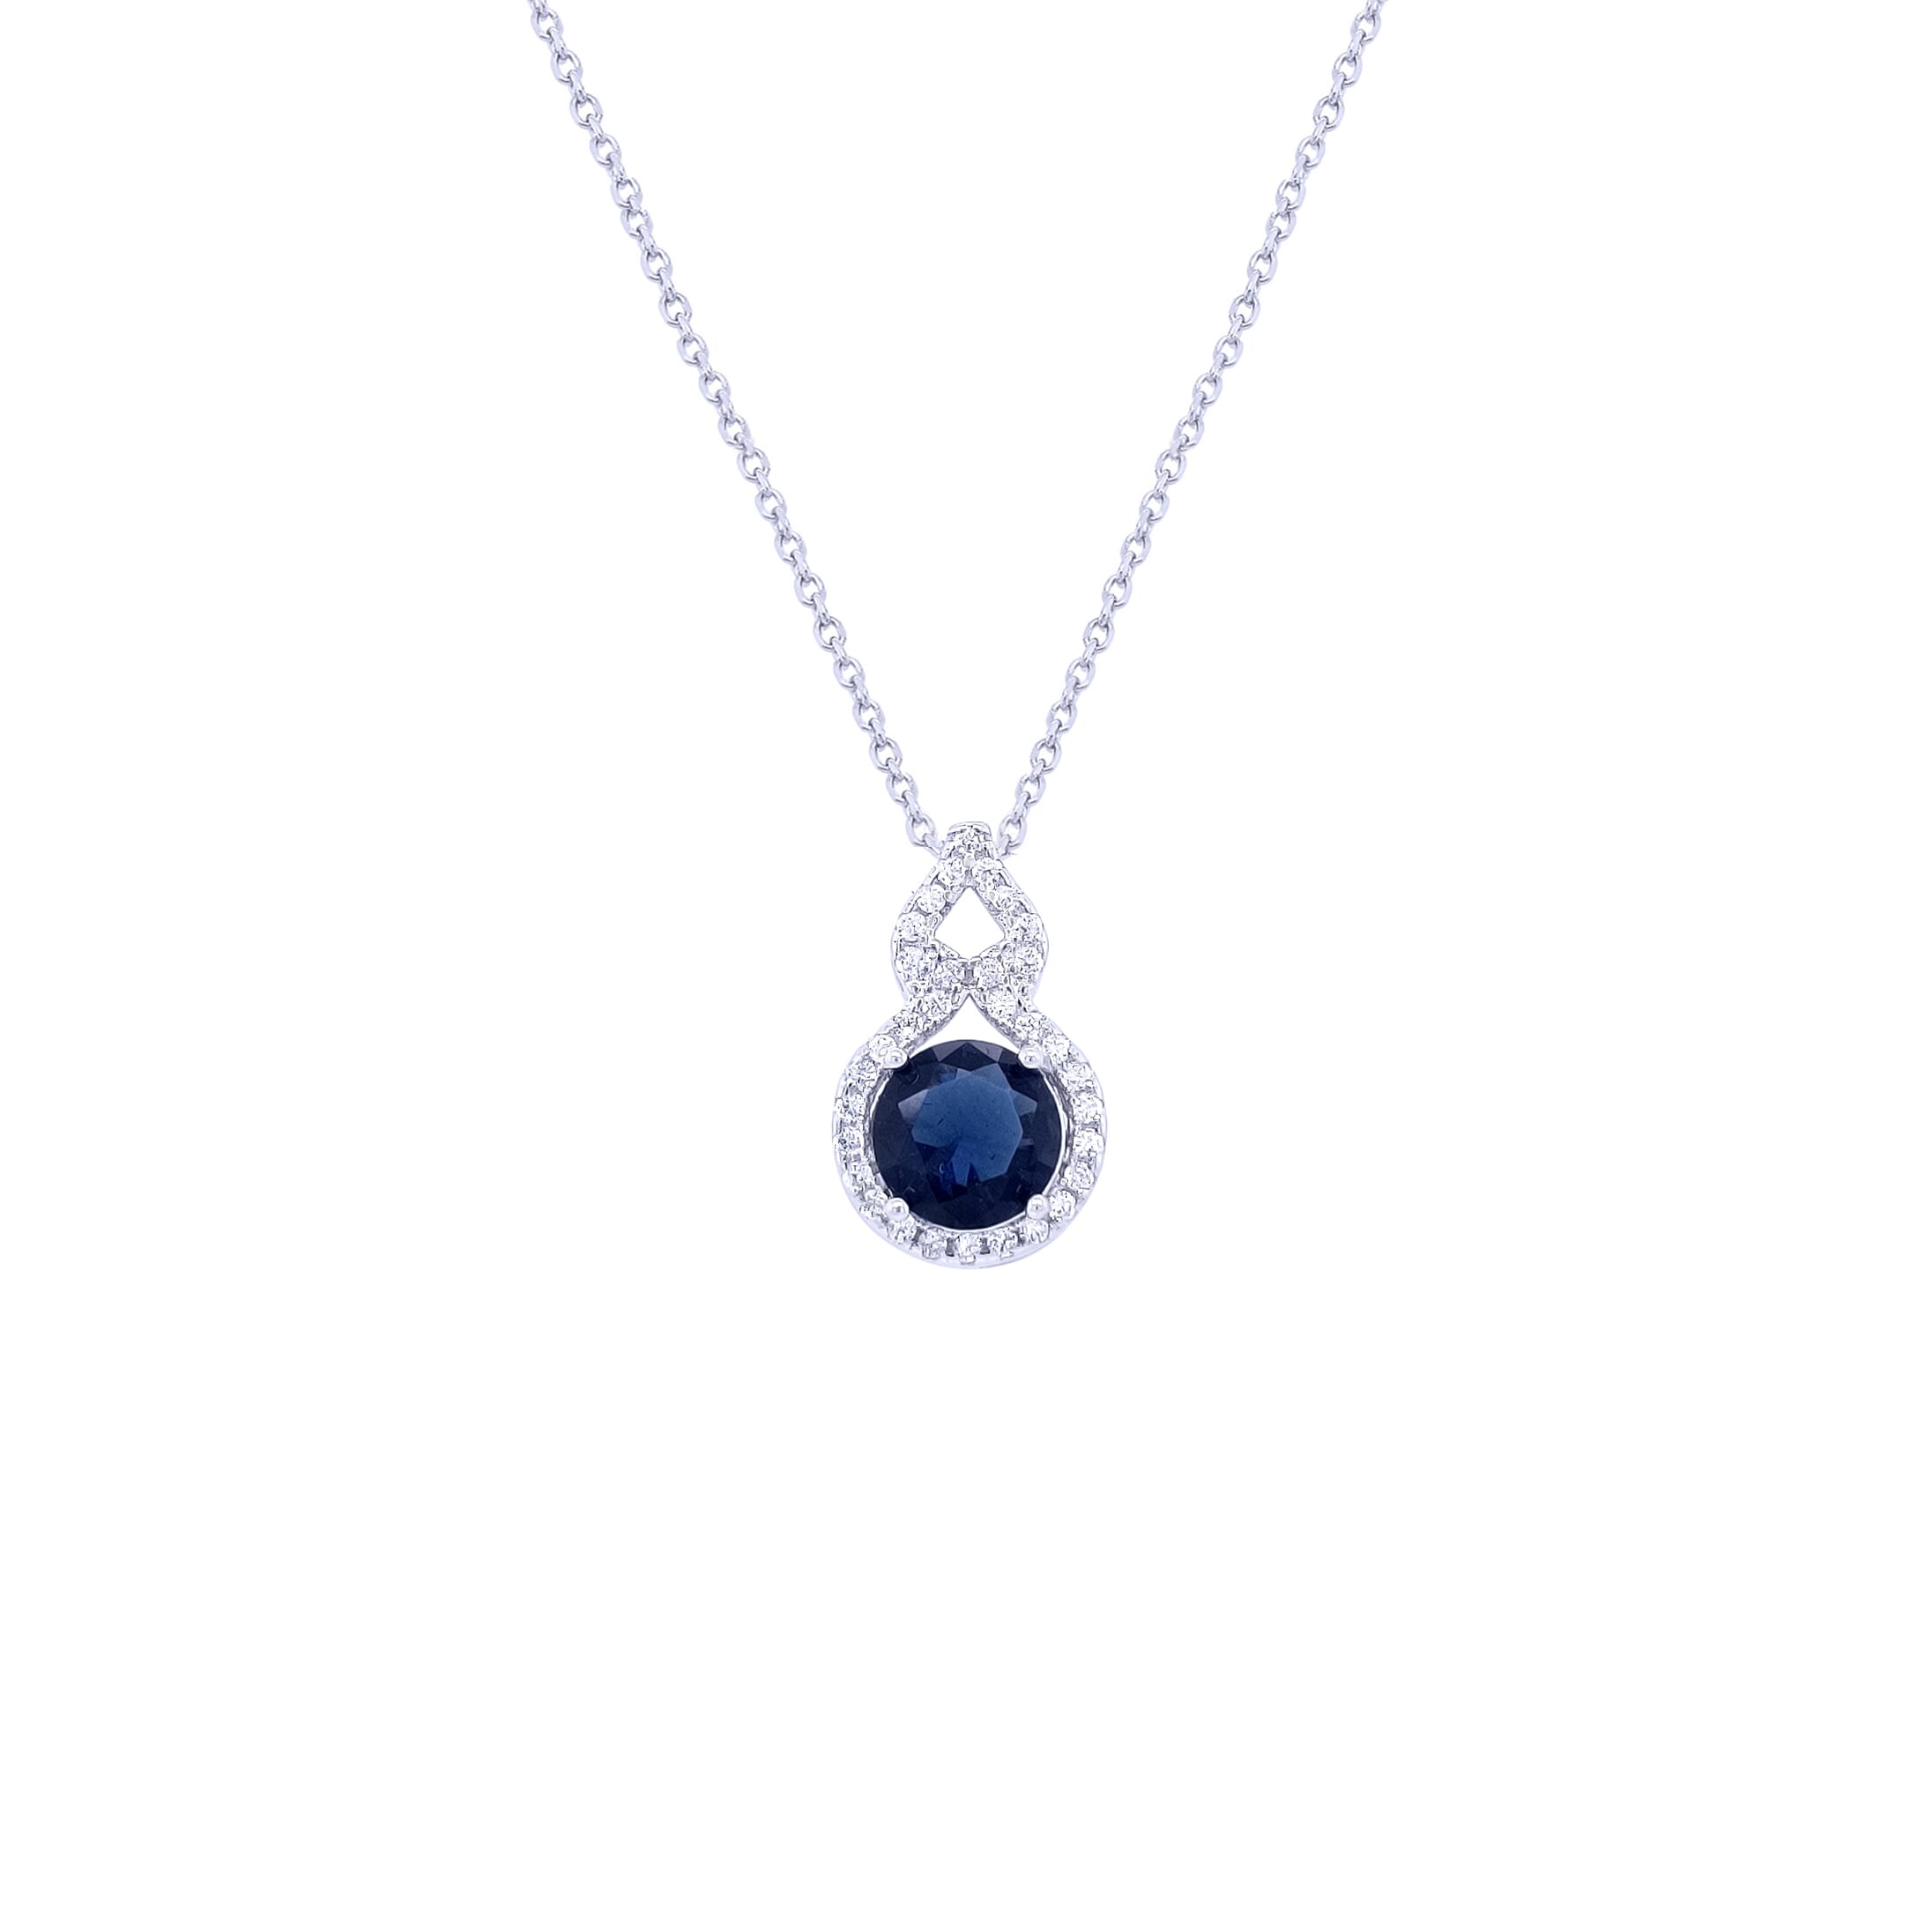 Asfour Sterling Silver 925 With A Pendant With A Circular Design Inlaid With A Blue Stone